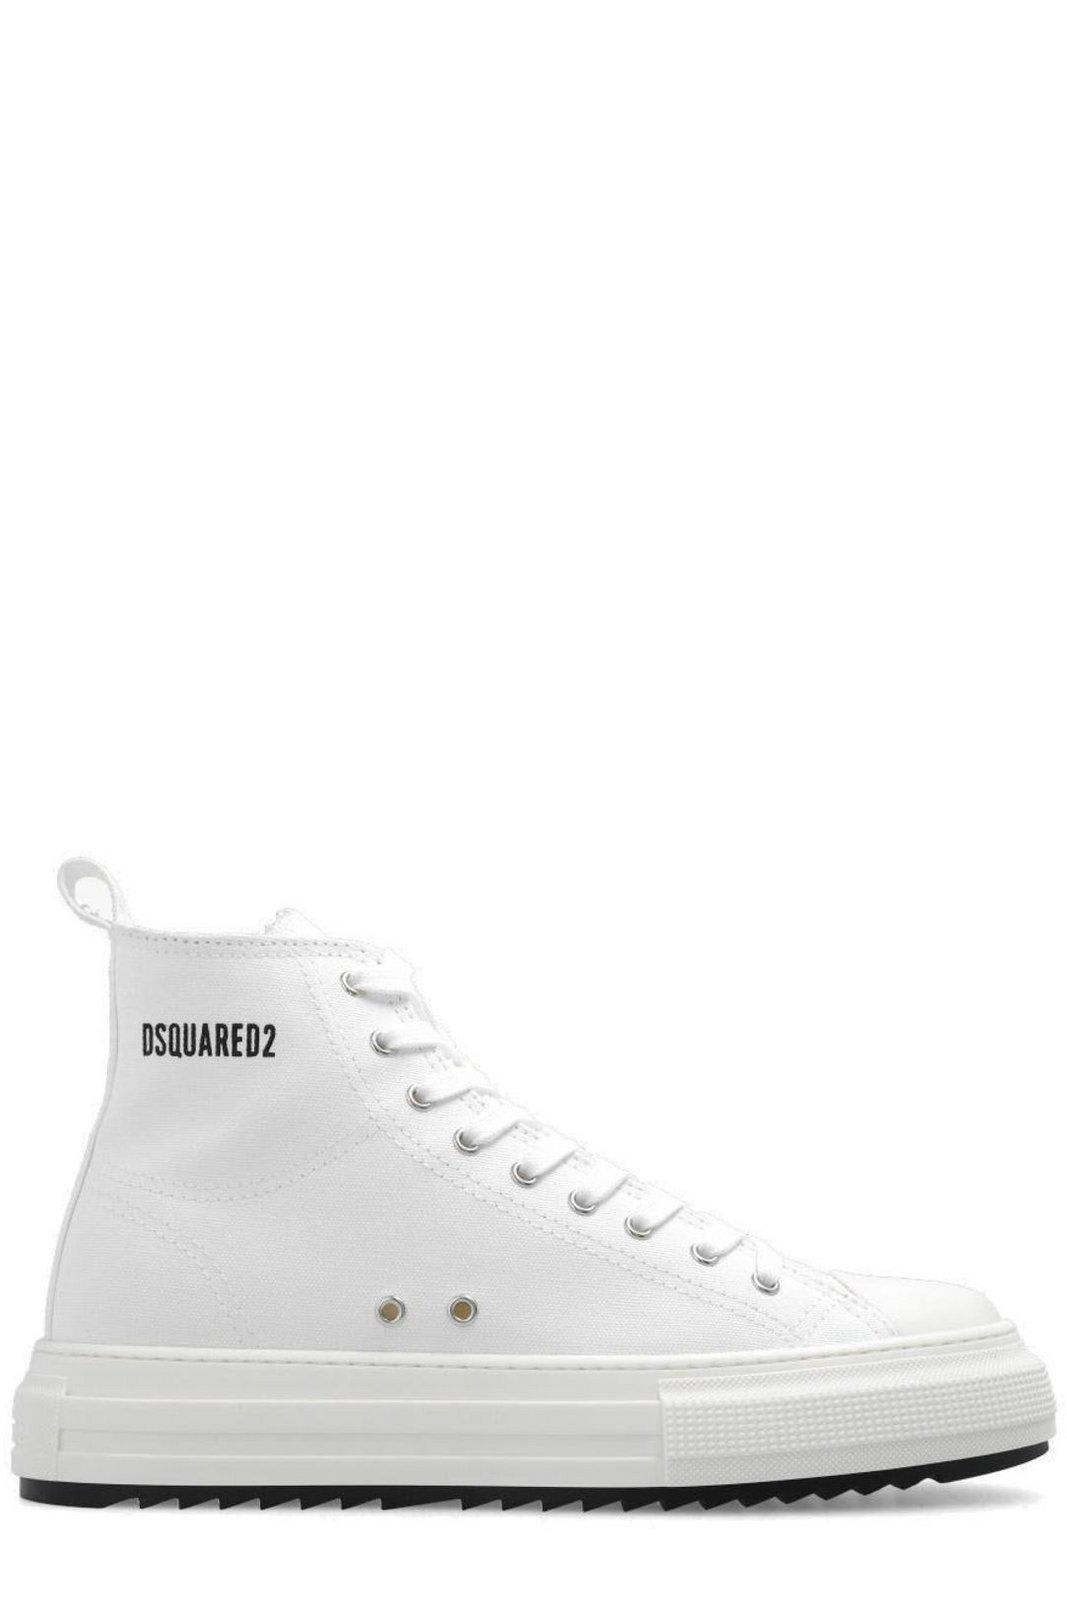 DSQUARED2 LOGO-PRINTED HIGH-TOP LACE-UP SNEAKERS